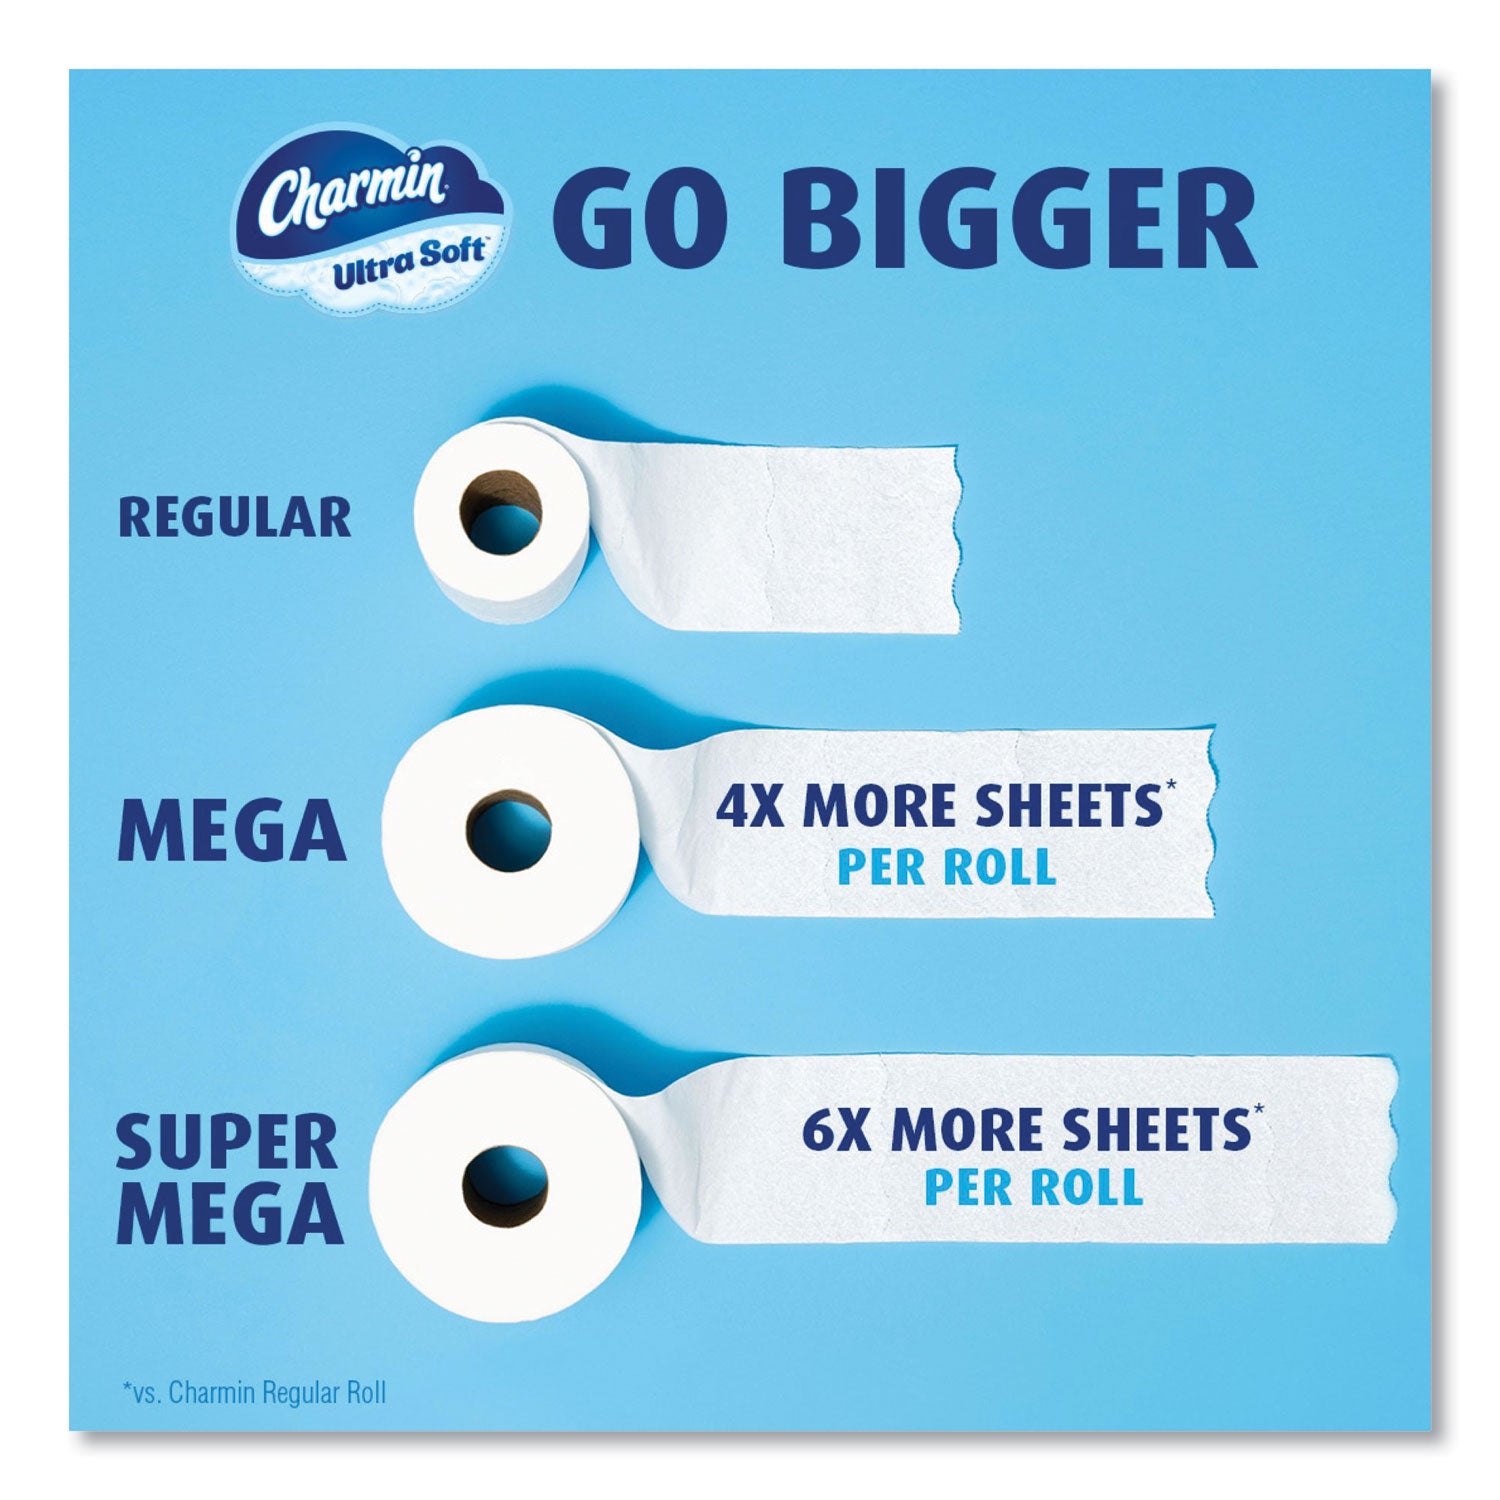 ultra-soft-bathroom-tissue-septic-safe-2-ply-white-224-sheets-roll-4-rolls-pack_pgc08806pk - 8